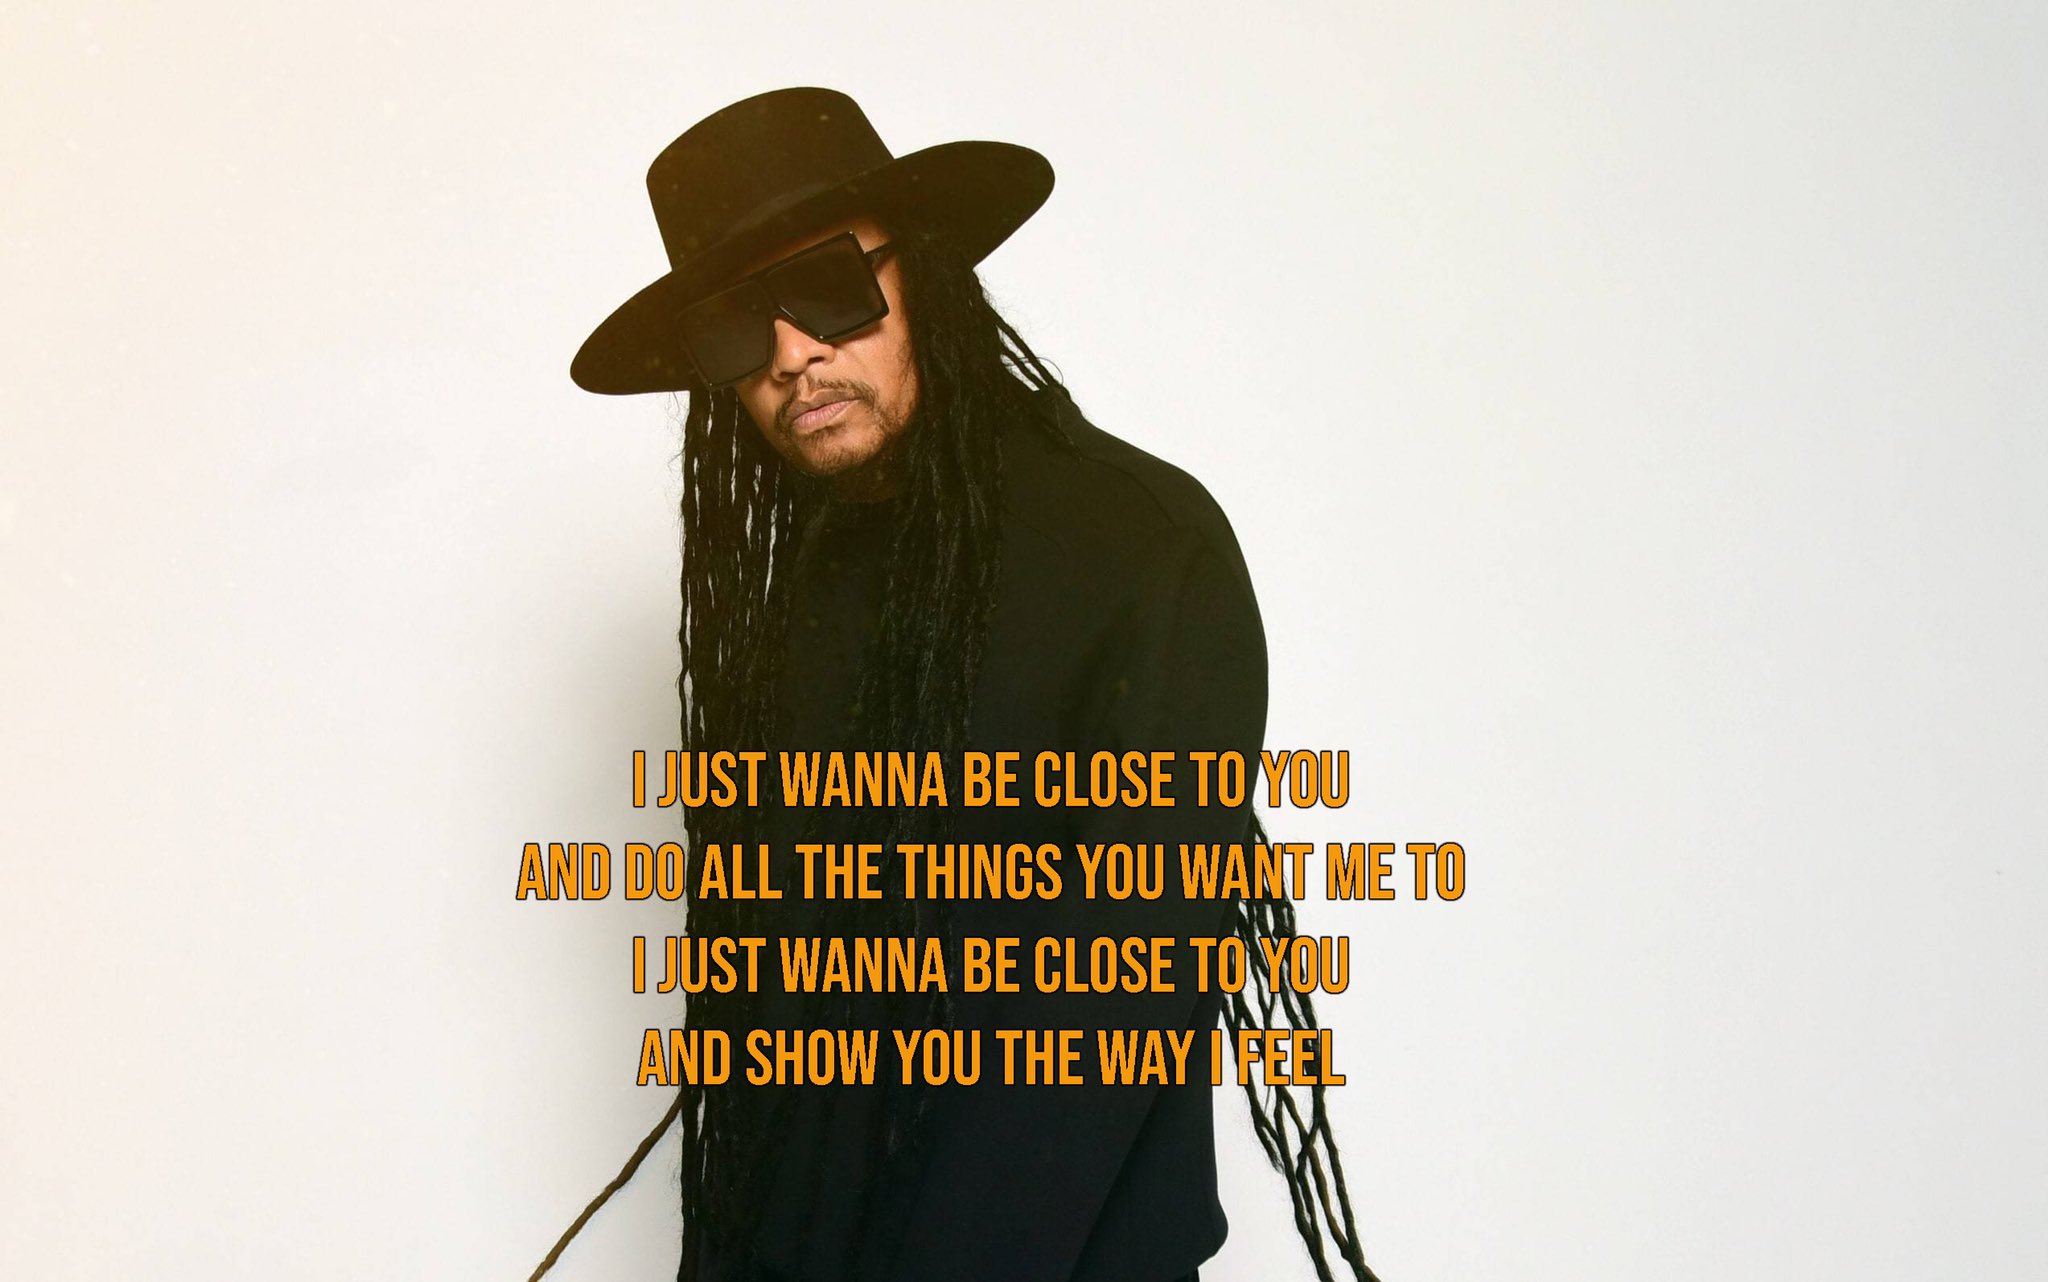  Close to You by Maxi Priest.  Happy Belated Birthday! 